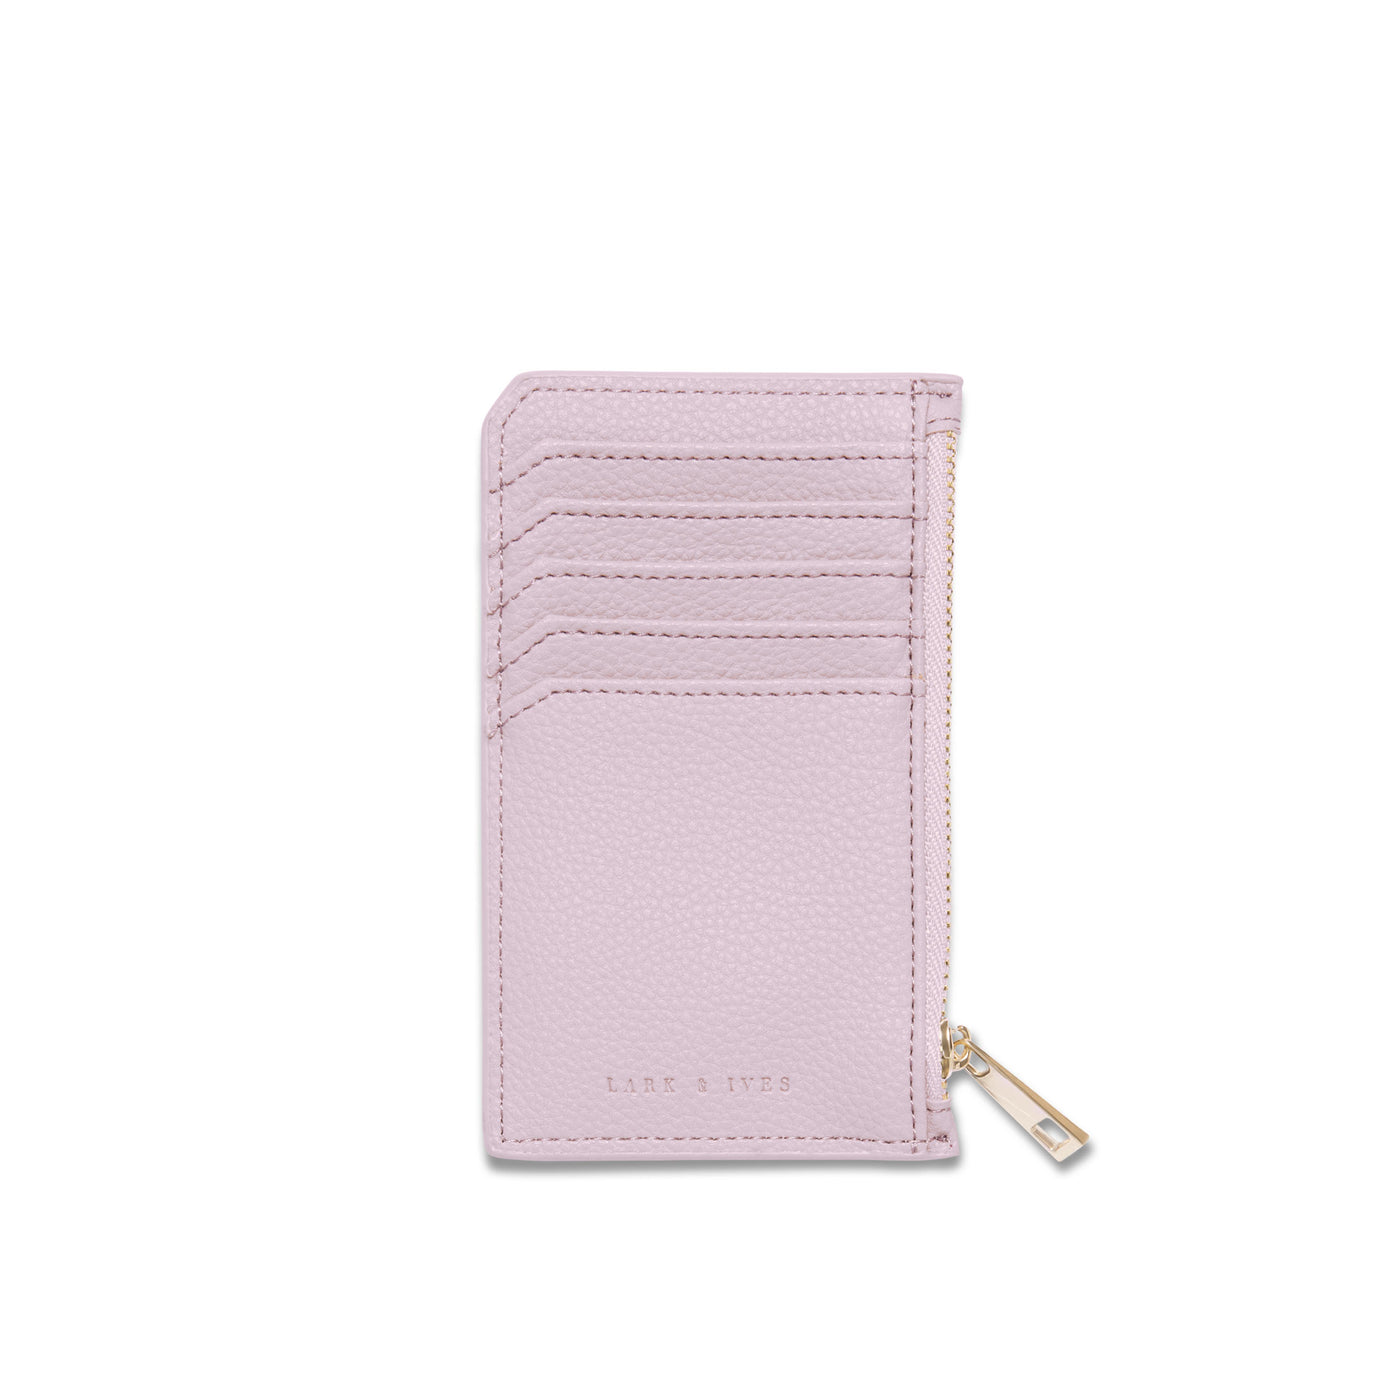 Lark and Ives / Vegan Leather Accessories / Small Accessories / Wallet / Mini Wallet / Card Case / Card Holder / Zippered Wallet / Zipper closure / Light Purple